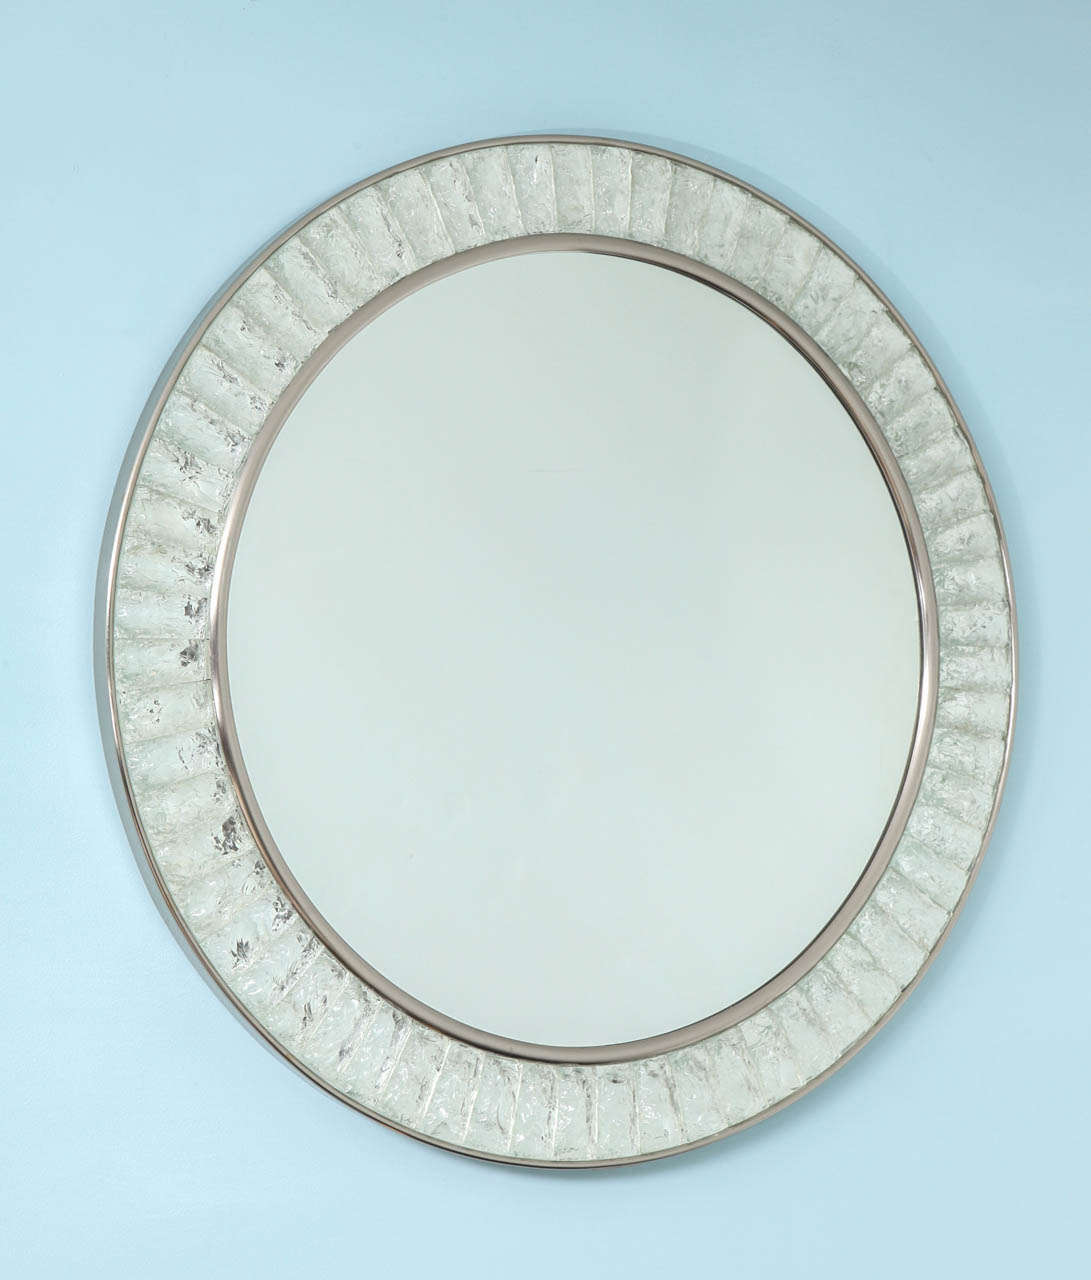 Circular mirror with brushed nickel mounts.  Features blcoks of chiseled crystal, inset into the frame.  Each piece is hand cut, and shaped to custom fit this piece.  A beautiful example of contemporary Italian studio work.